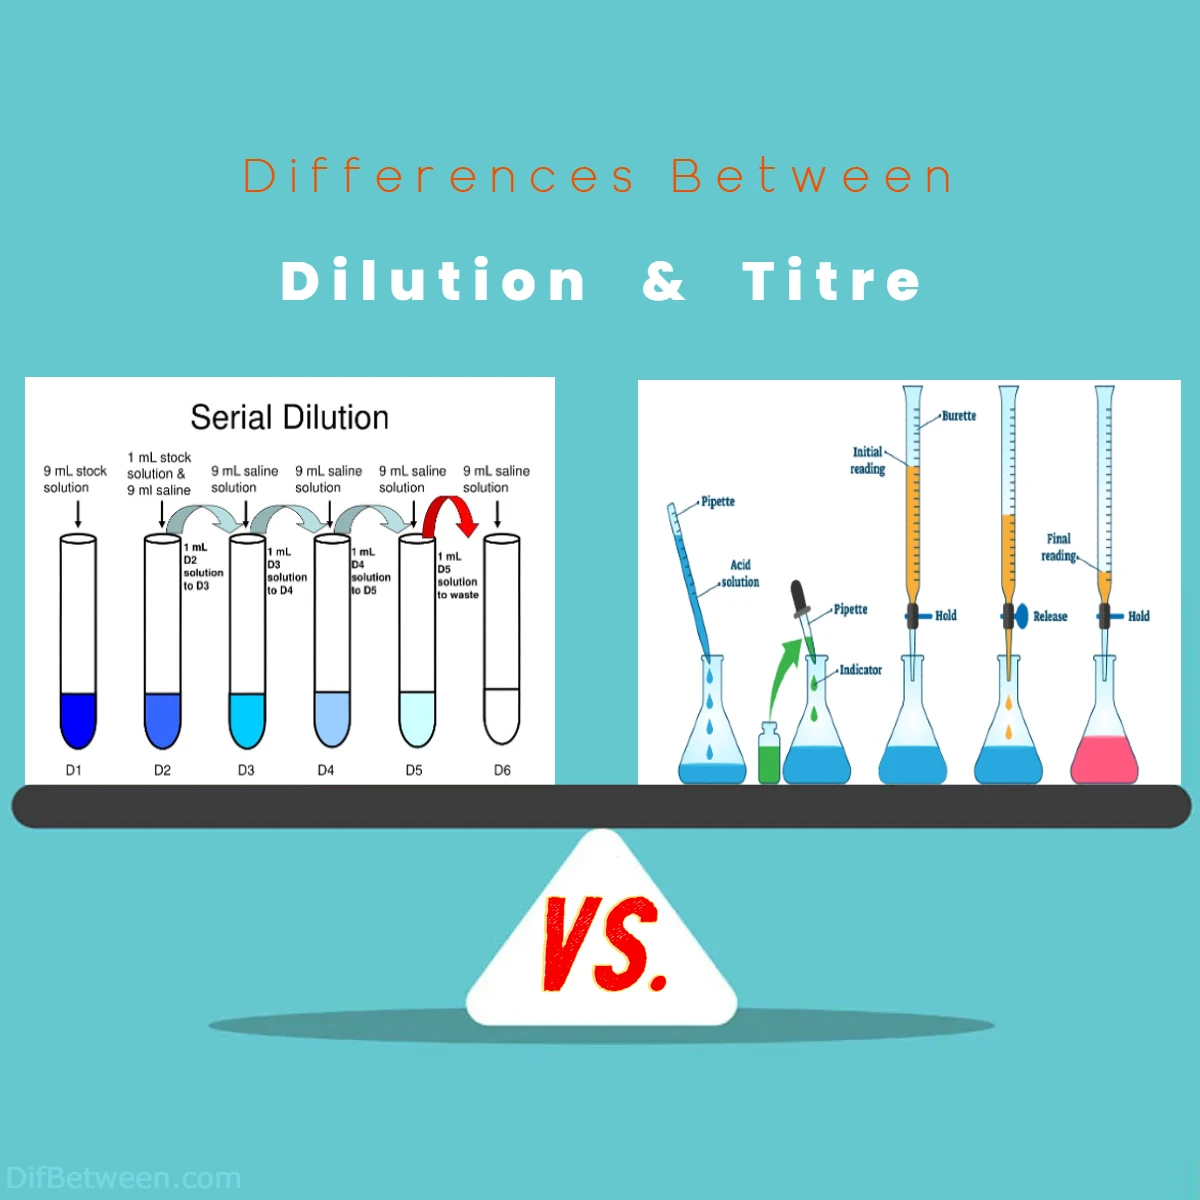 Differences Between Dilution vs Titre